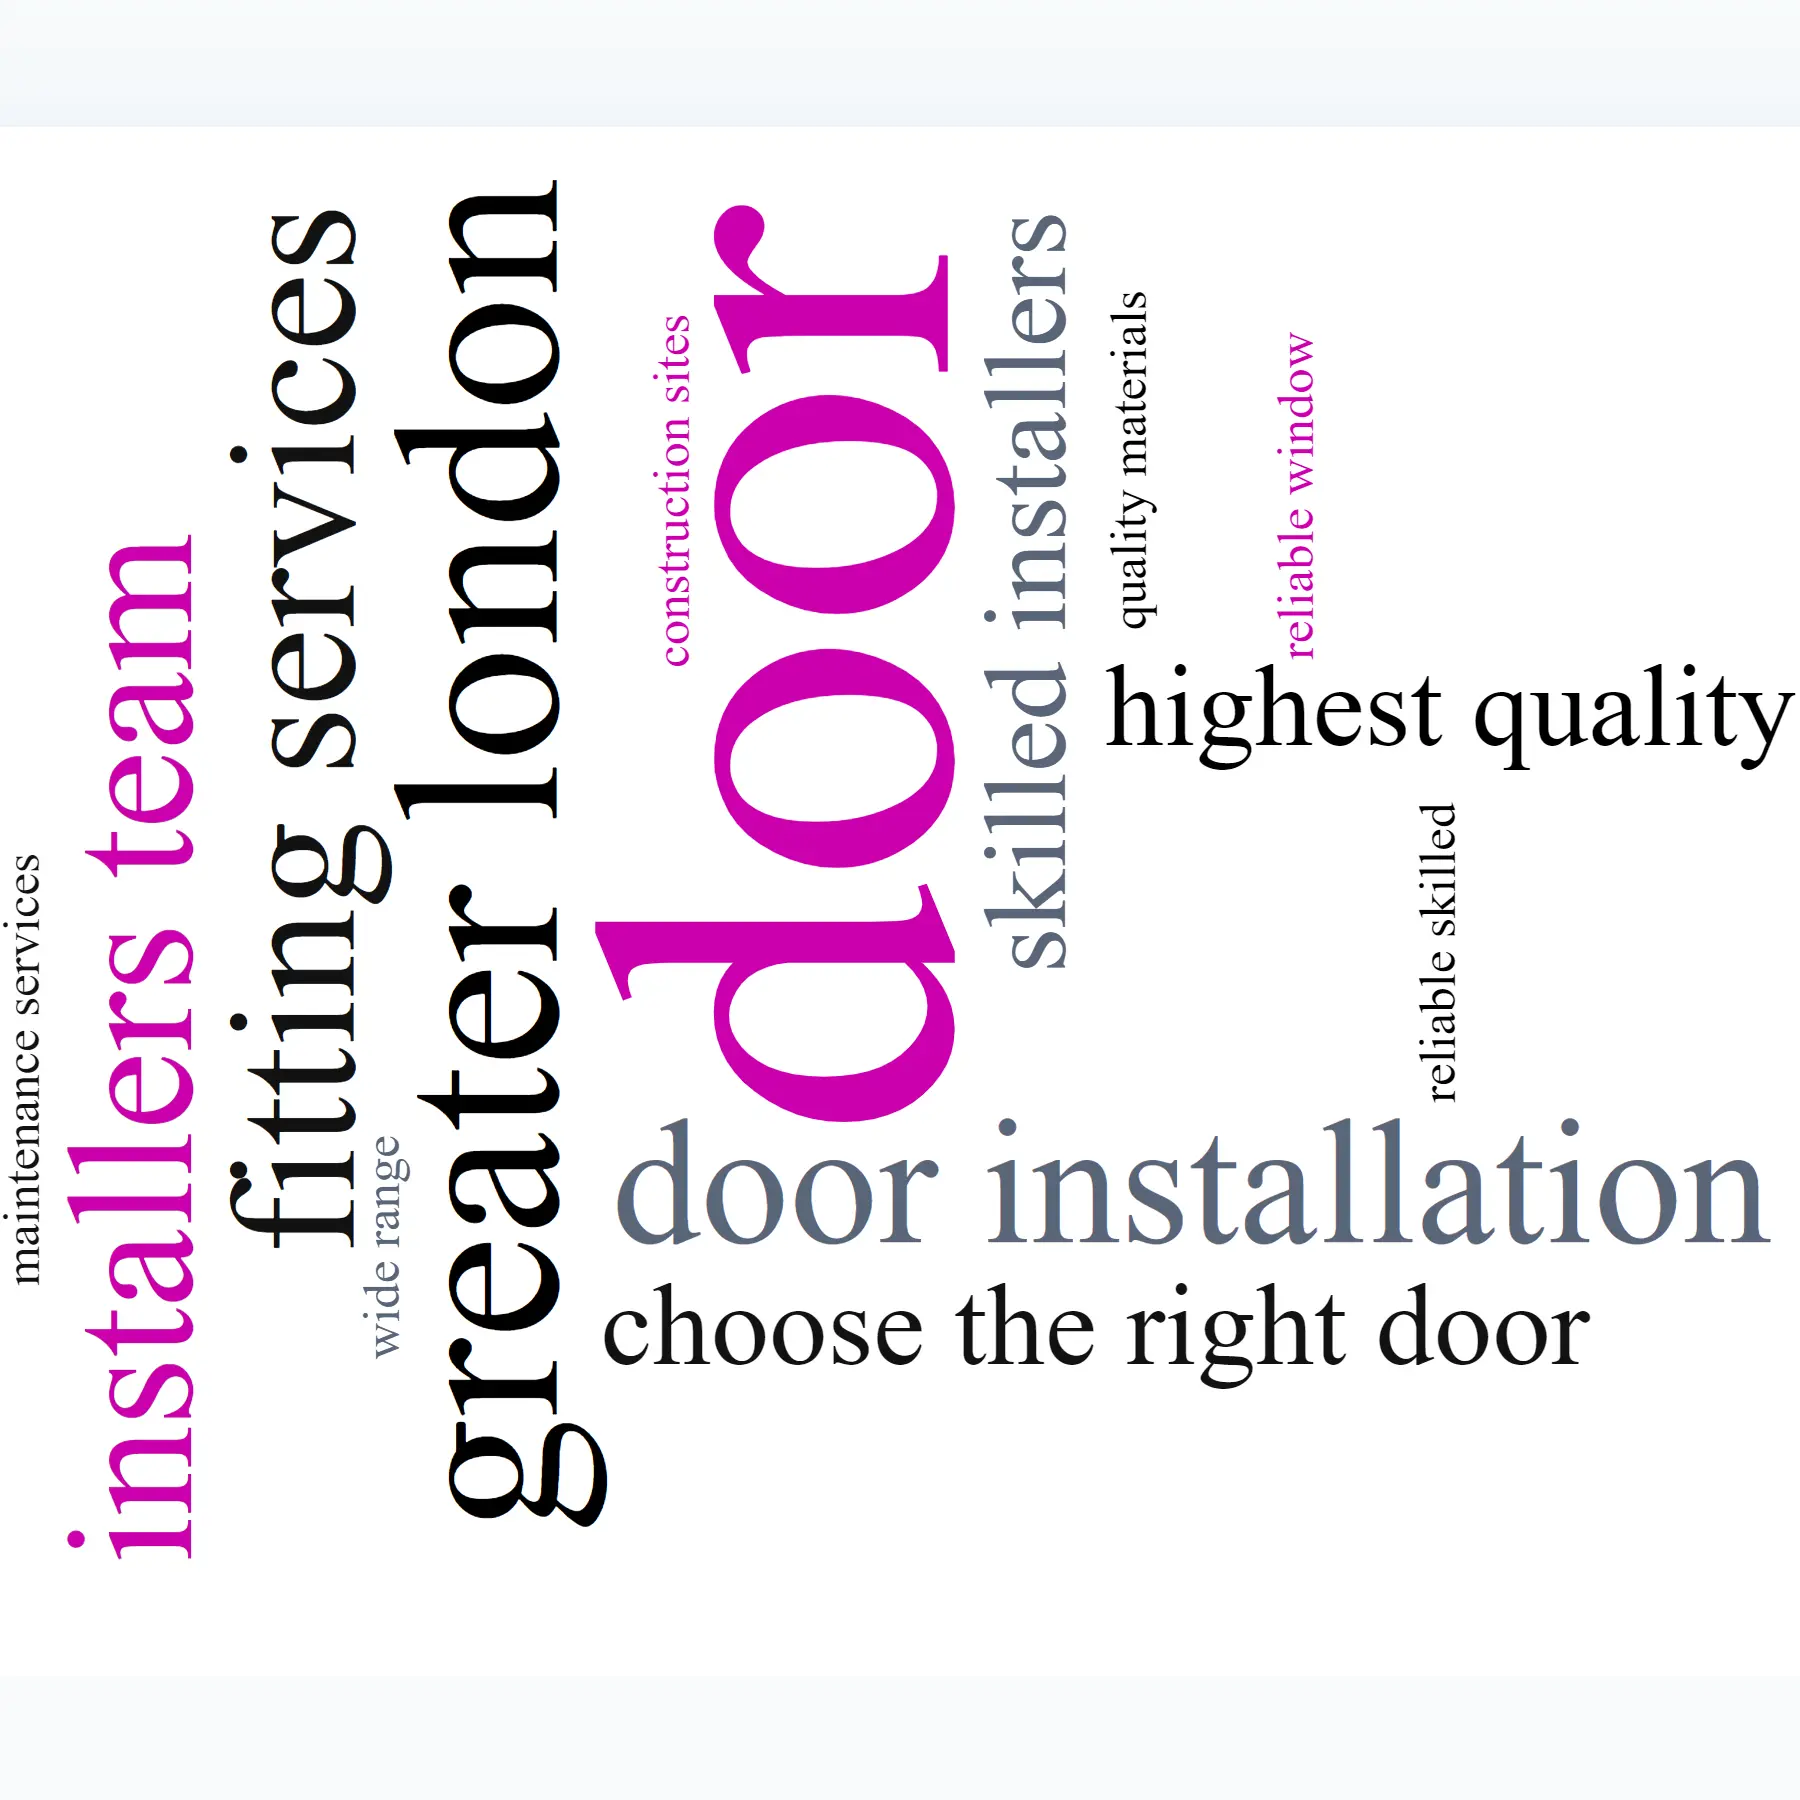 Window Fitters offers window and door installation services, including replacement, repairs, and maintenance.  Contact us for a free consultation a.